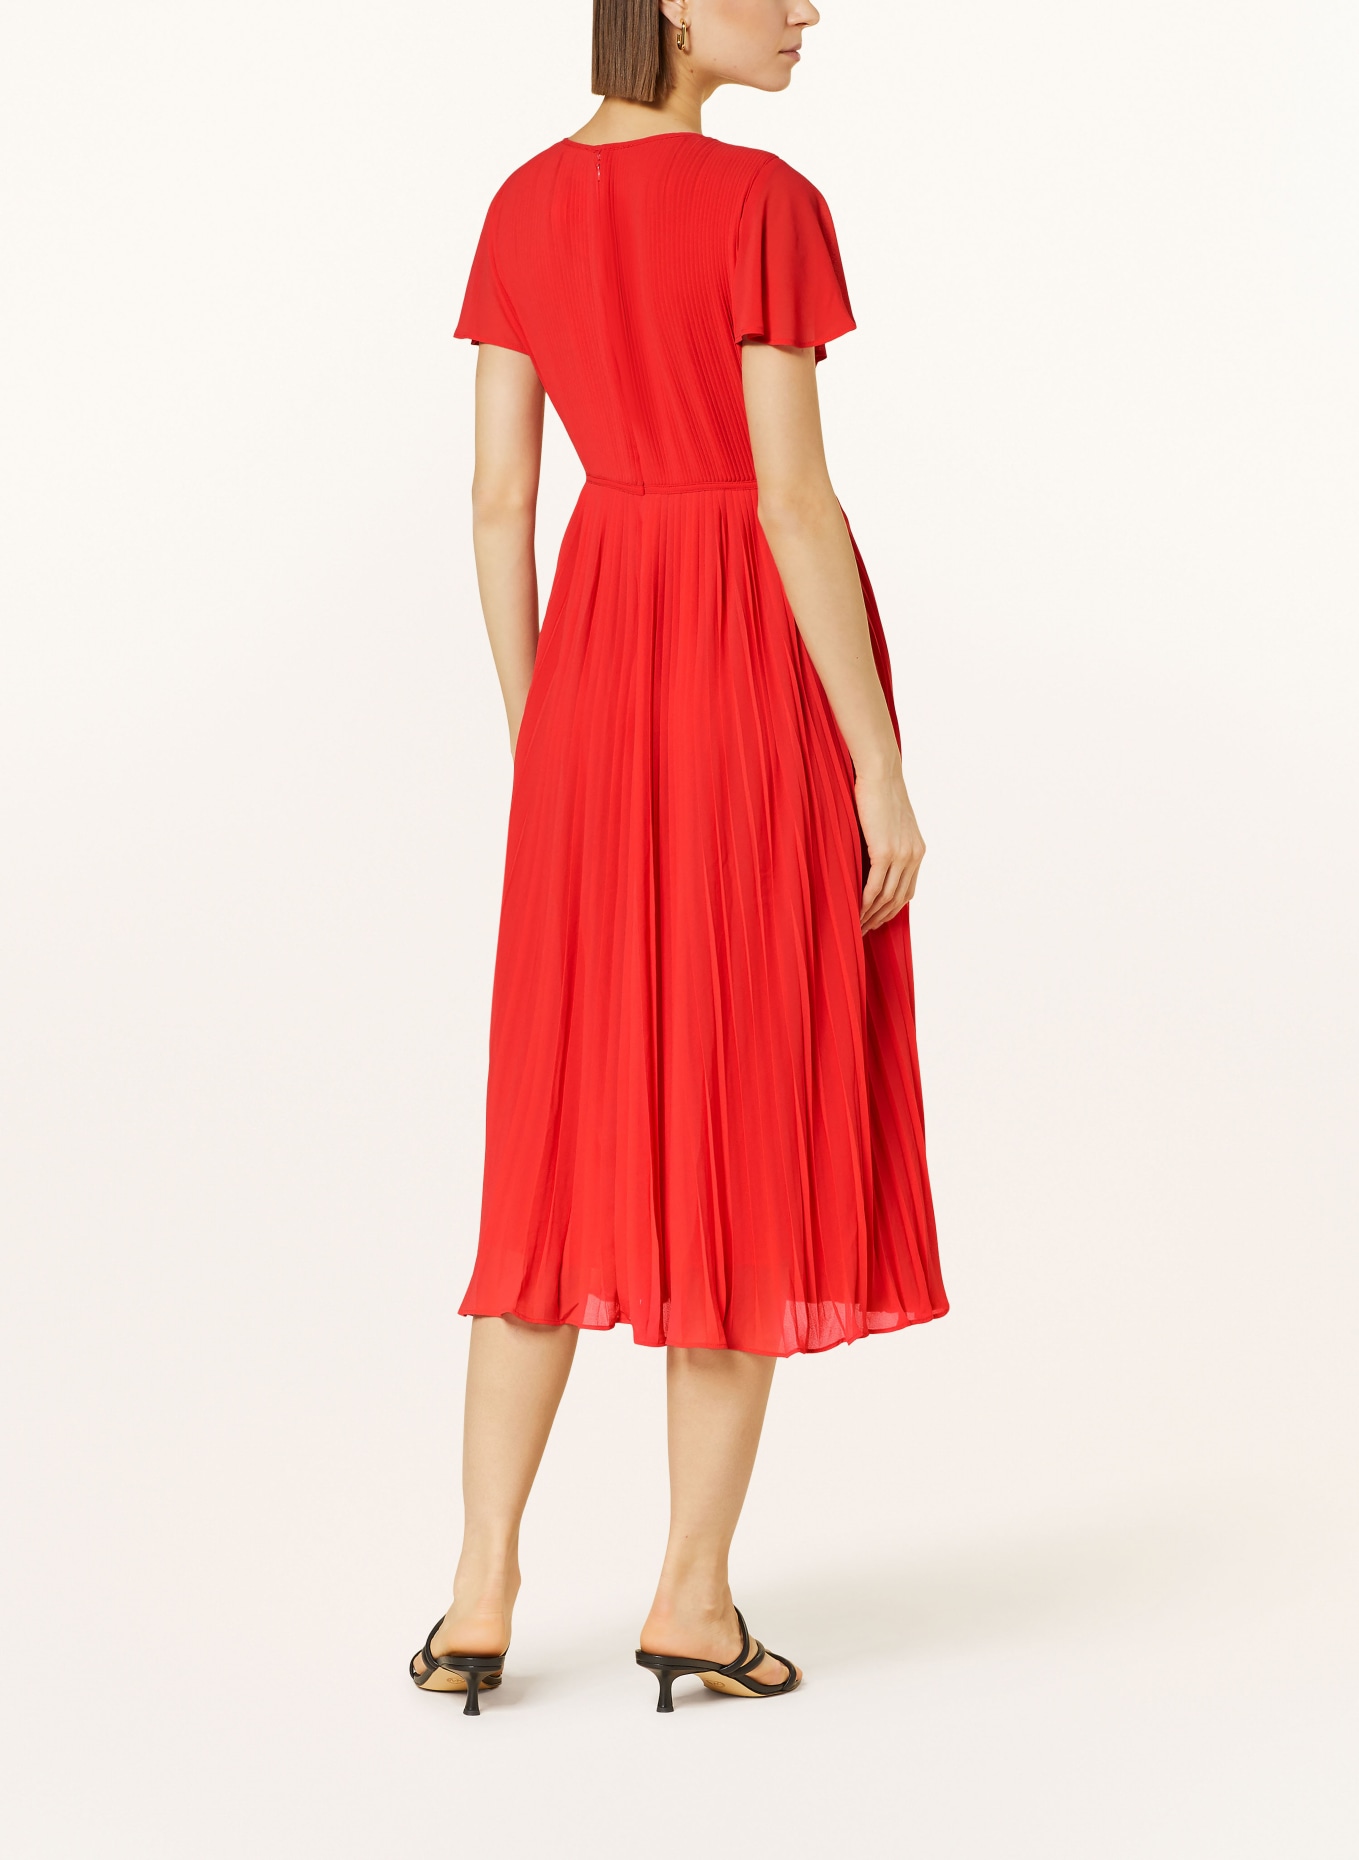 MICHAEL KORS Pleated dress, Color: RED (Image 3)